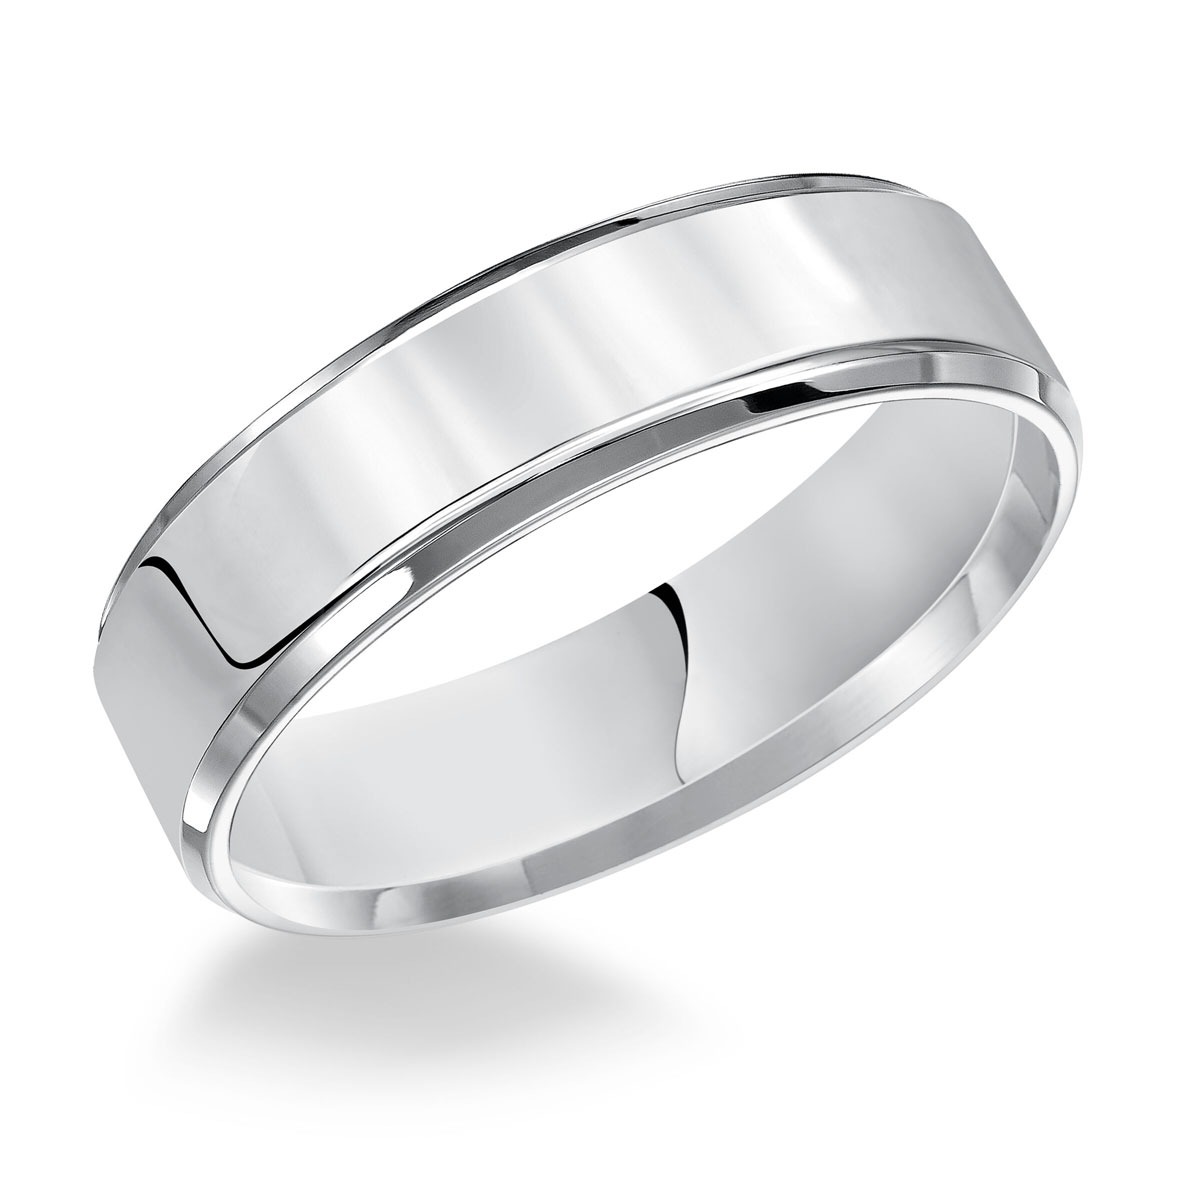 8 mm Comfort Fit Flat Wedding Band with Beveled Edge in